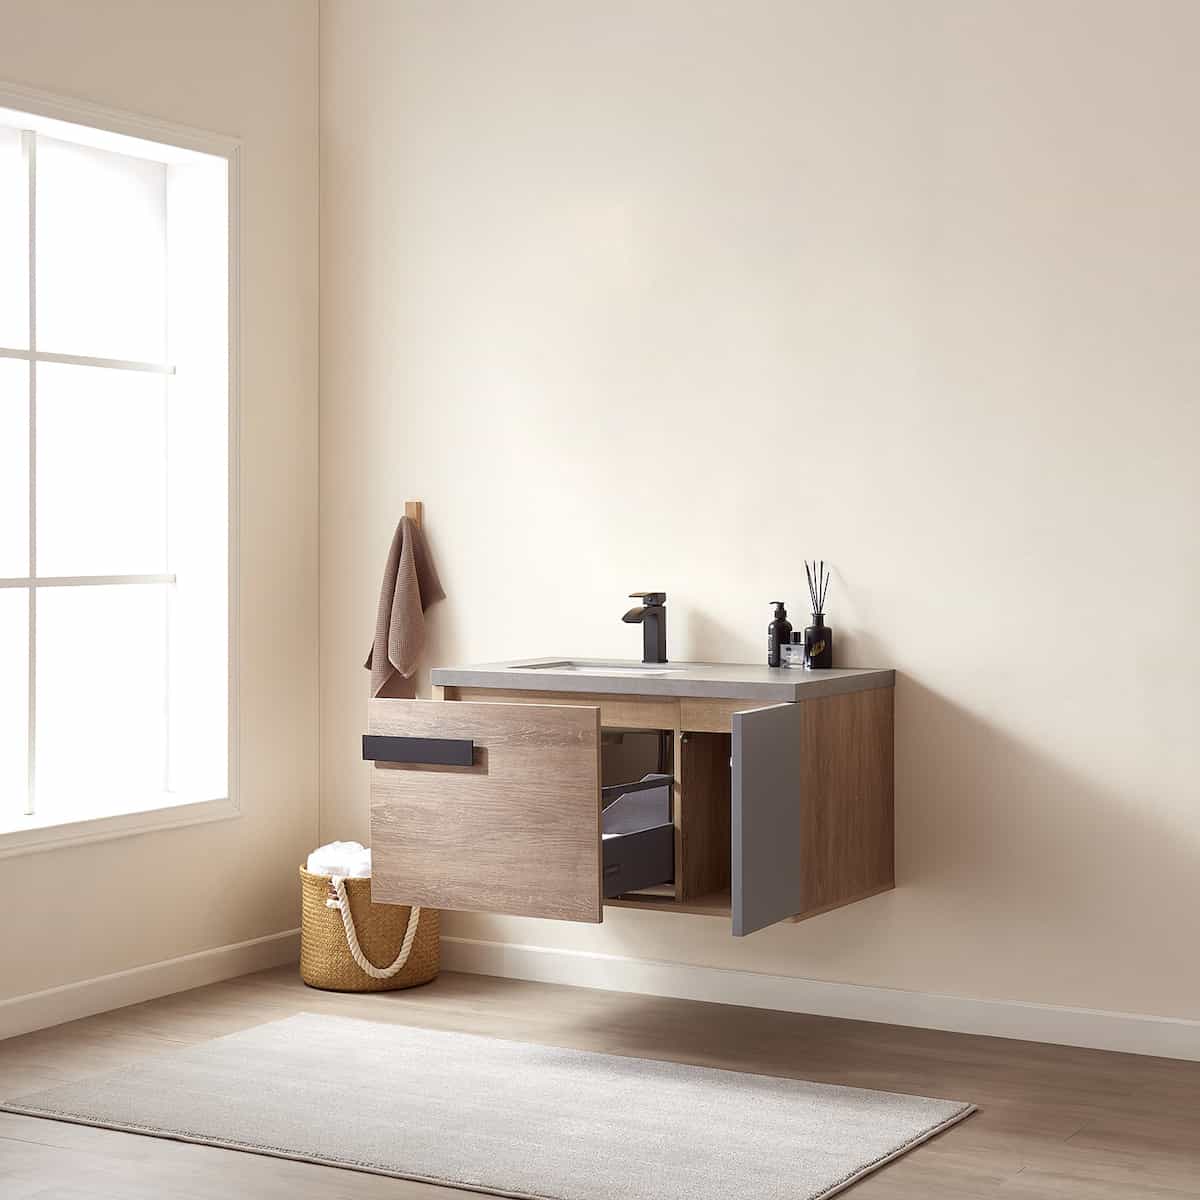 Vinnova Carcastillo 40 Inch Wall Mount Single Vanity in North American Oak with Grey Sintered Stone Top Without Mirror Inside 703240-NO-WK-NM